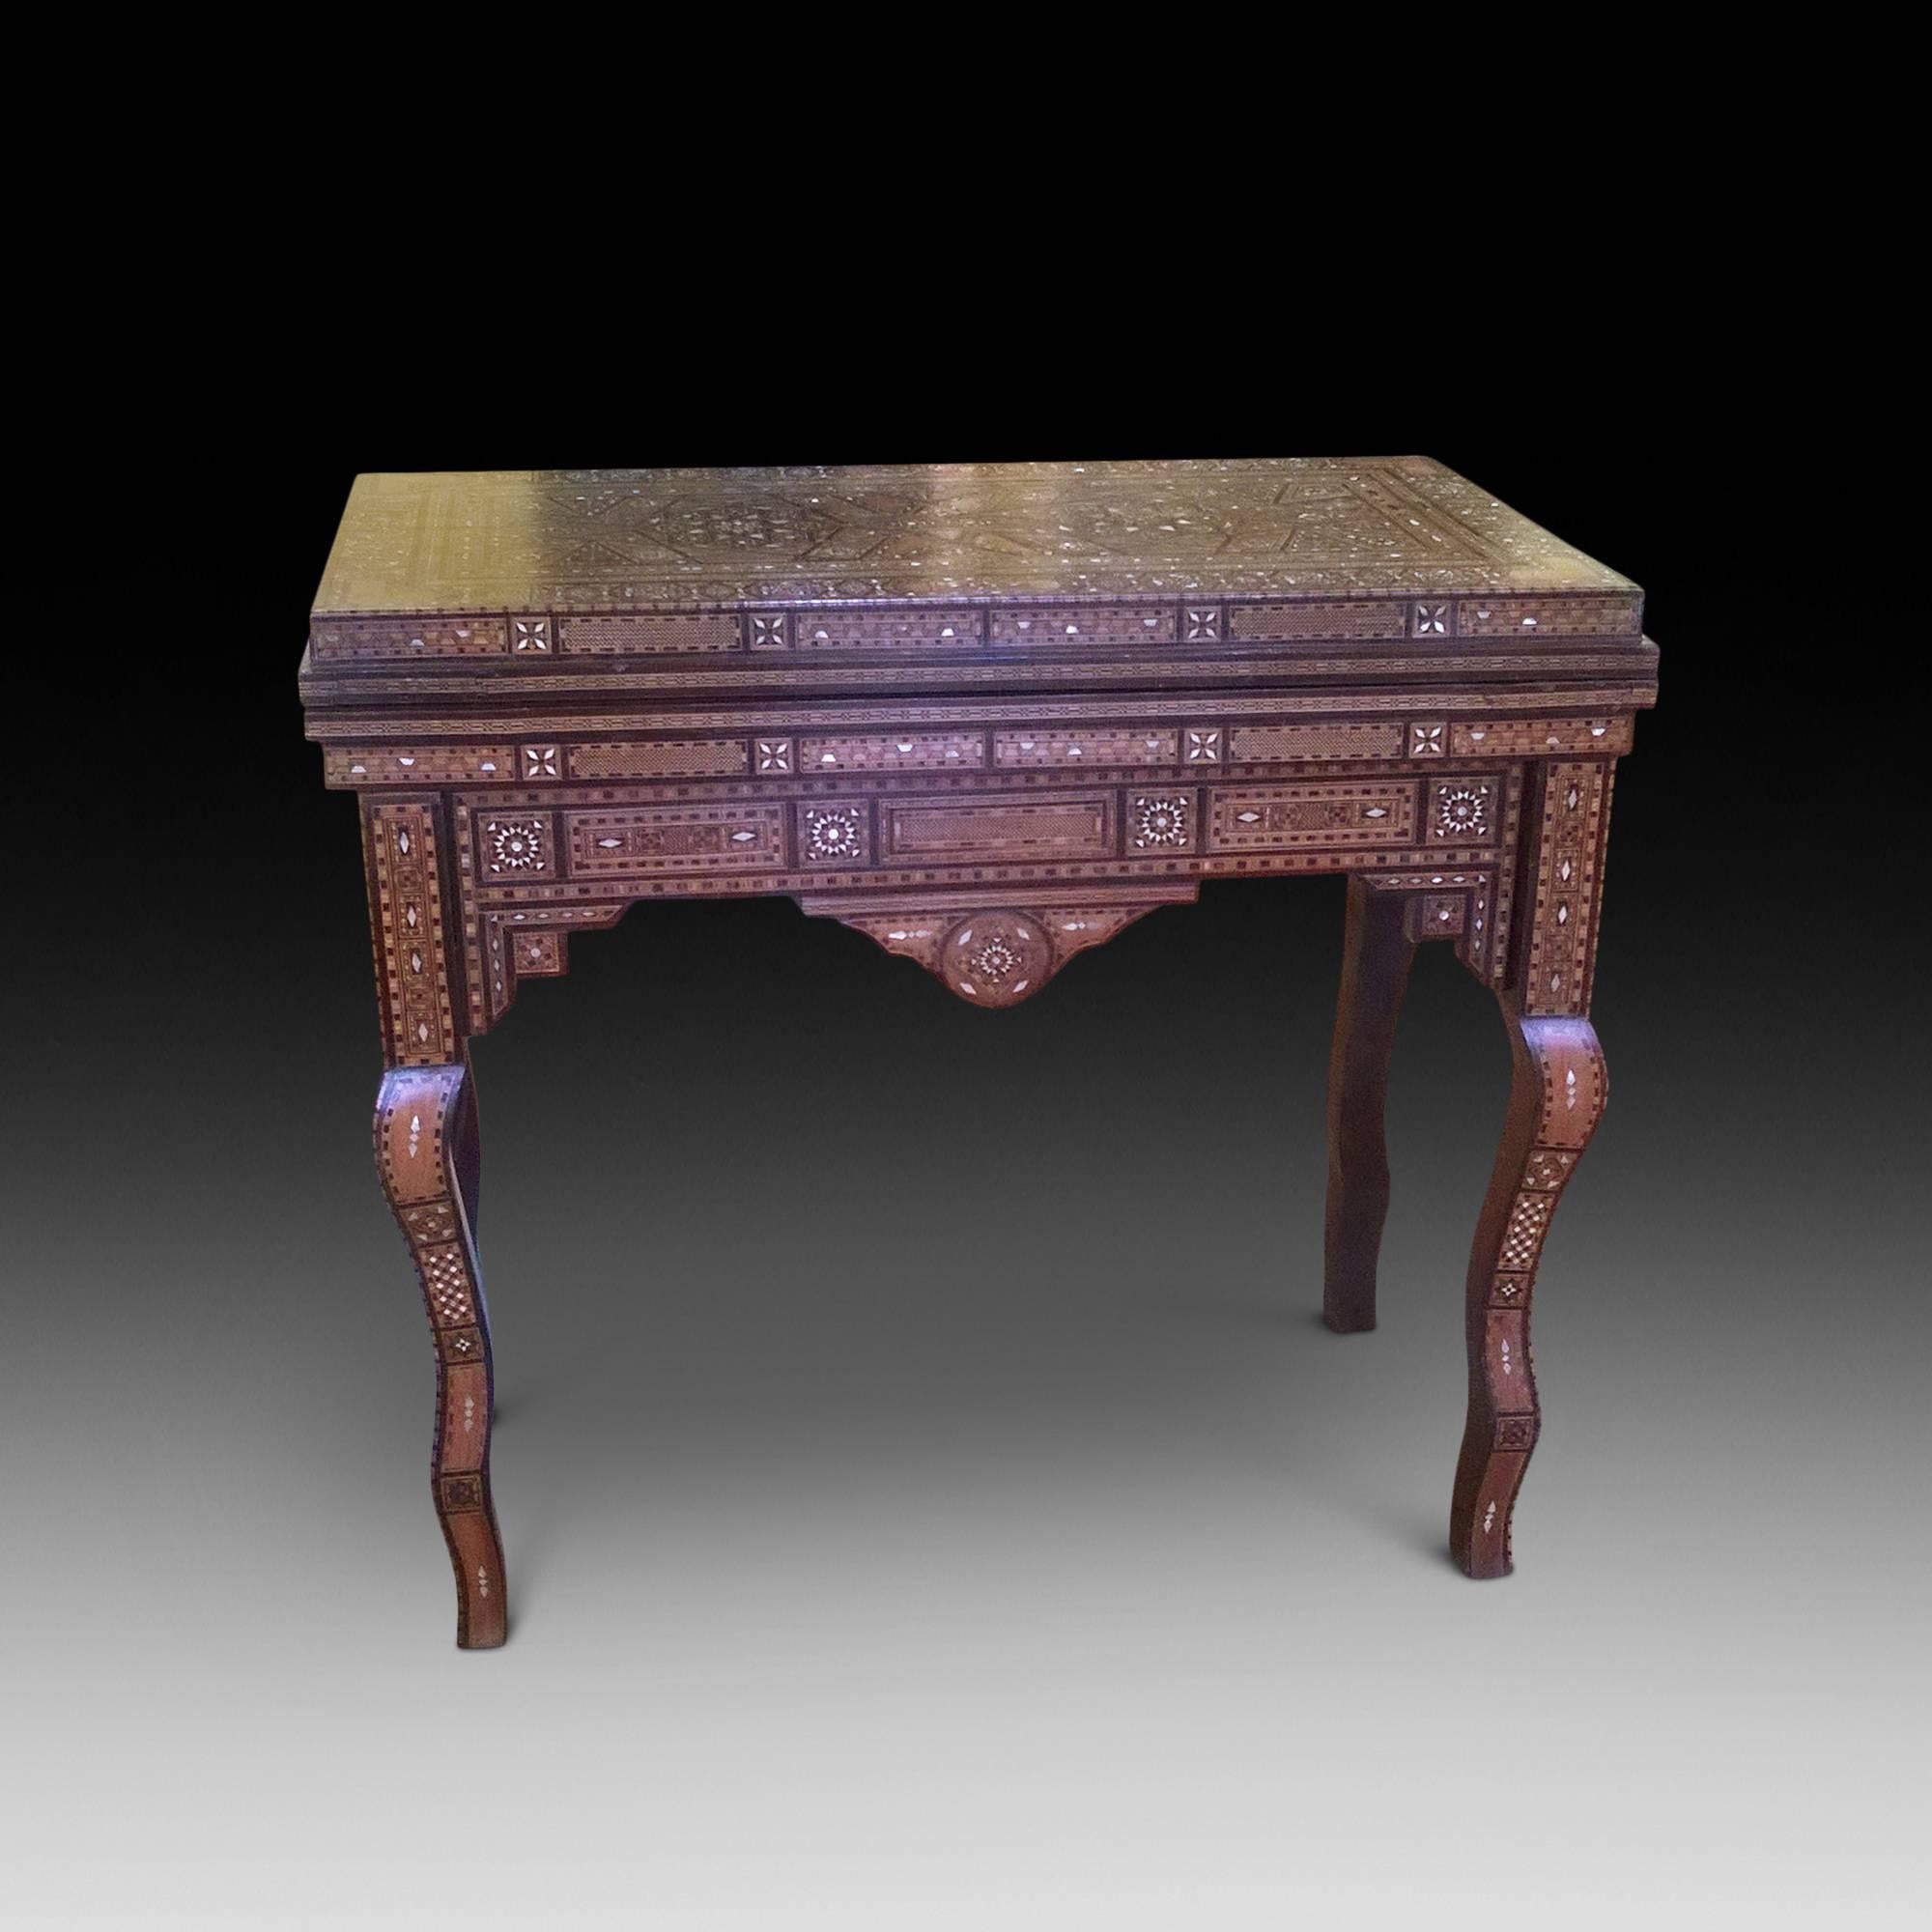 A Persian marquetry rectangular games table for cards, chess, chequers and backgammon - folding top enclosing an inset playing surface and an arrangement of compartments with sliding covers, profusely inlaid overall in the Moorish taste with